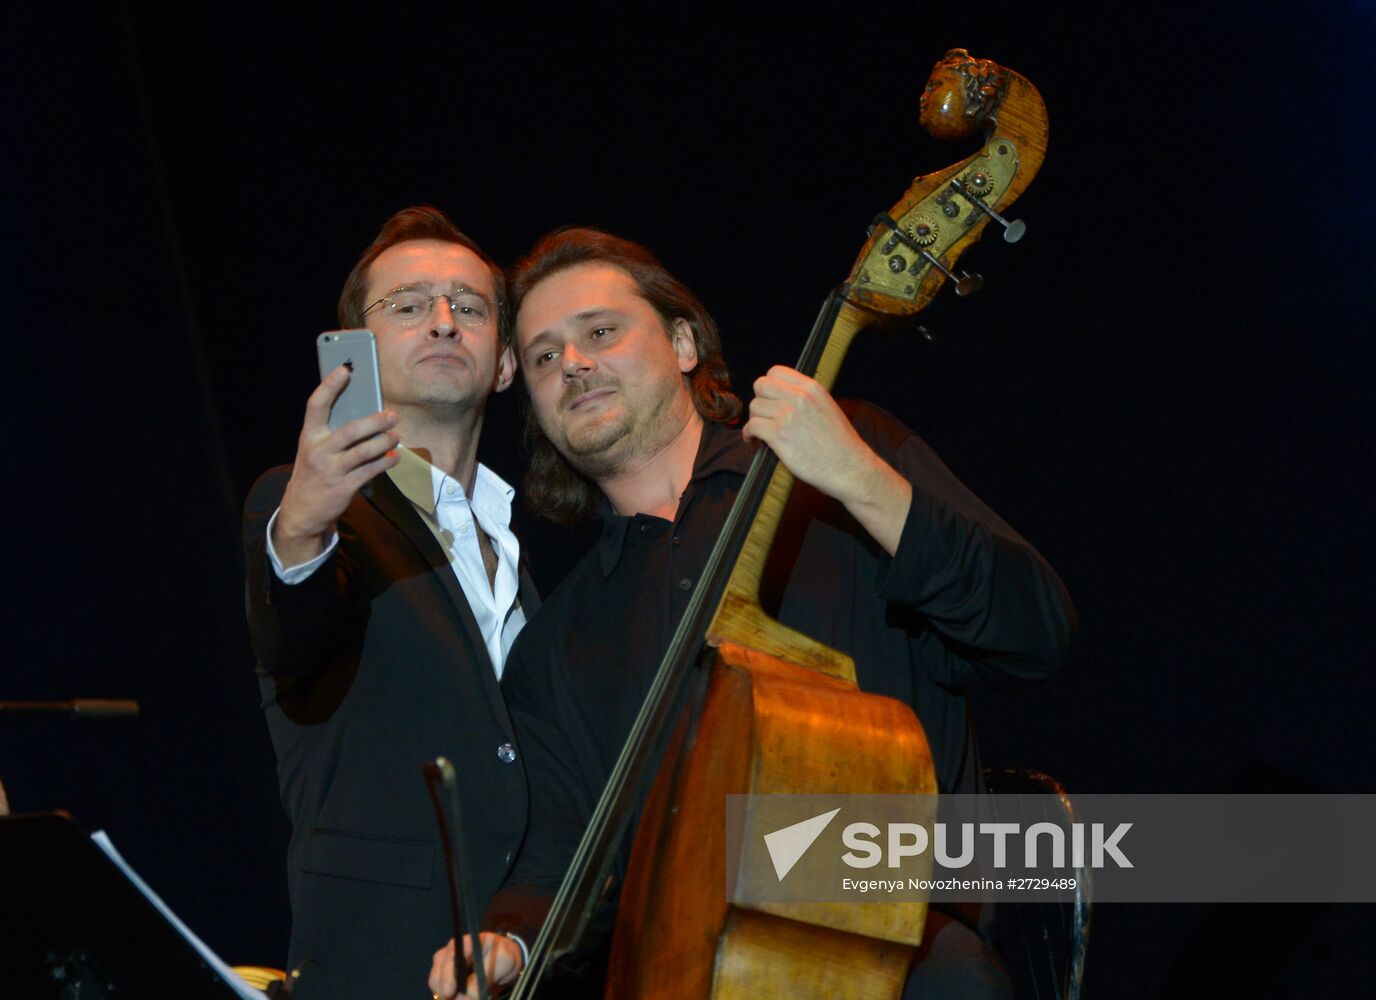 Musical-literary project by Konstantin Khabensky and Yuri Bashmet presented in Moscow